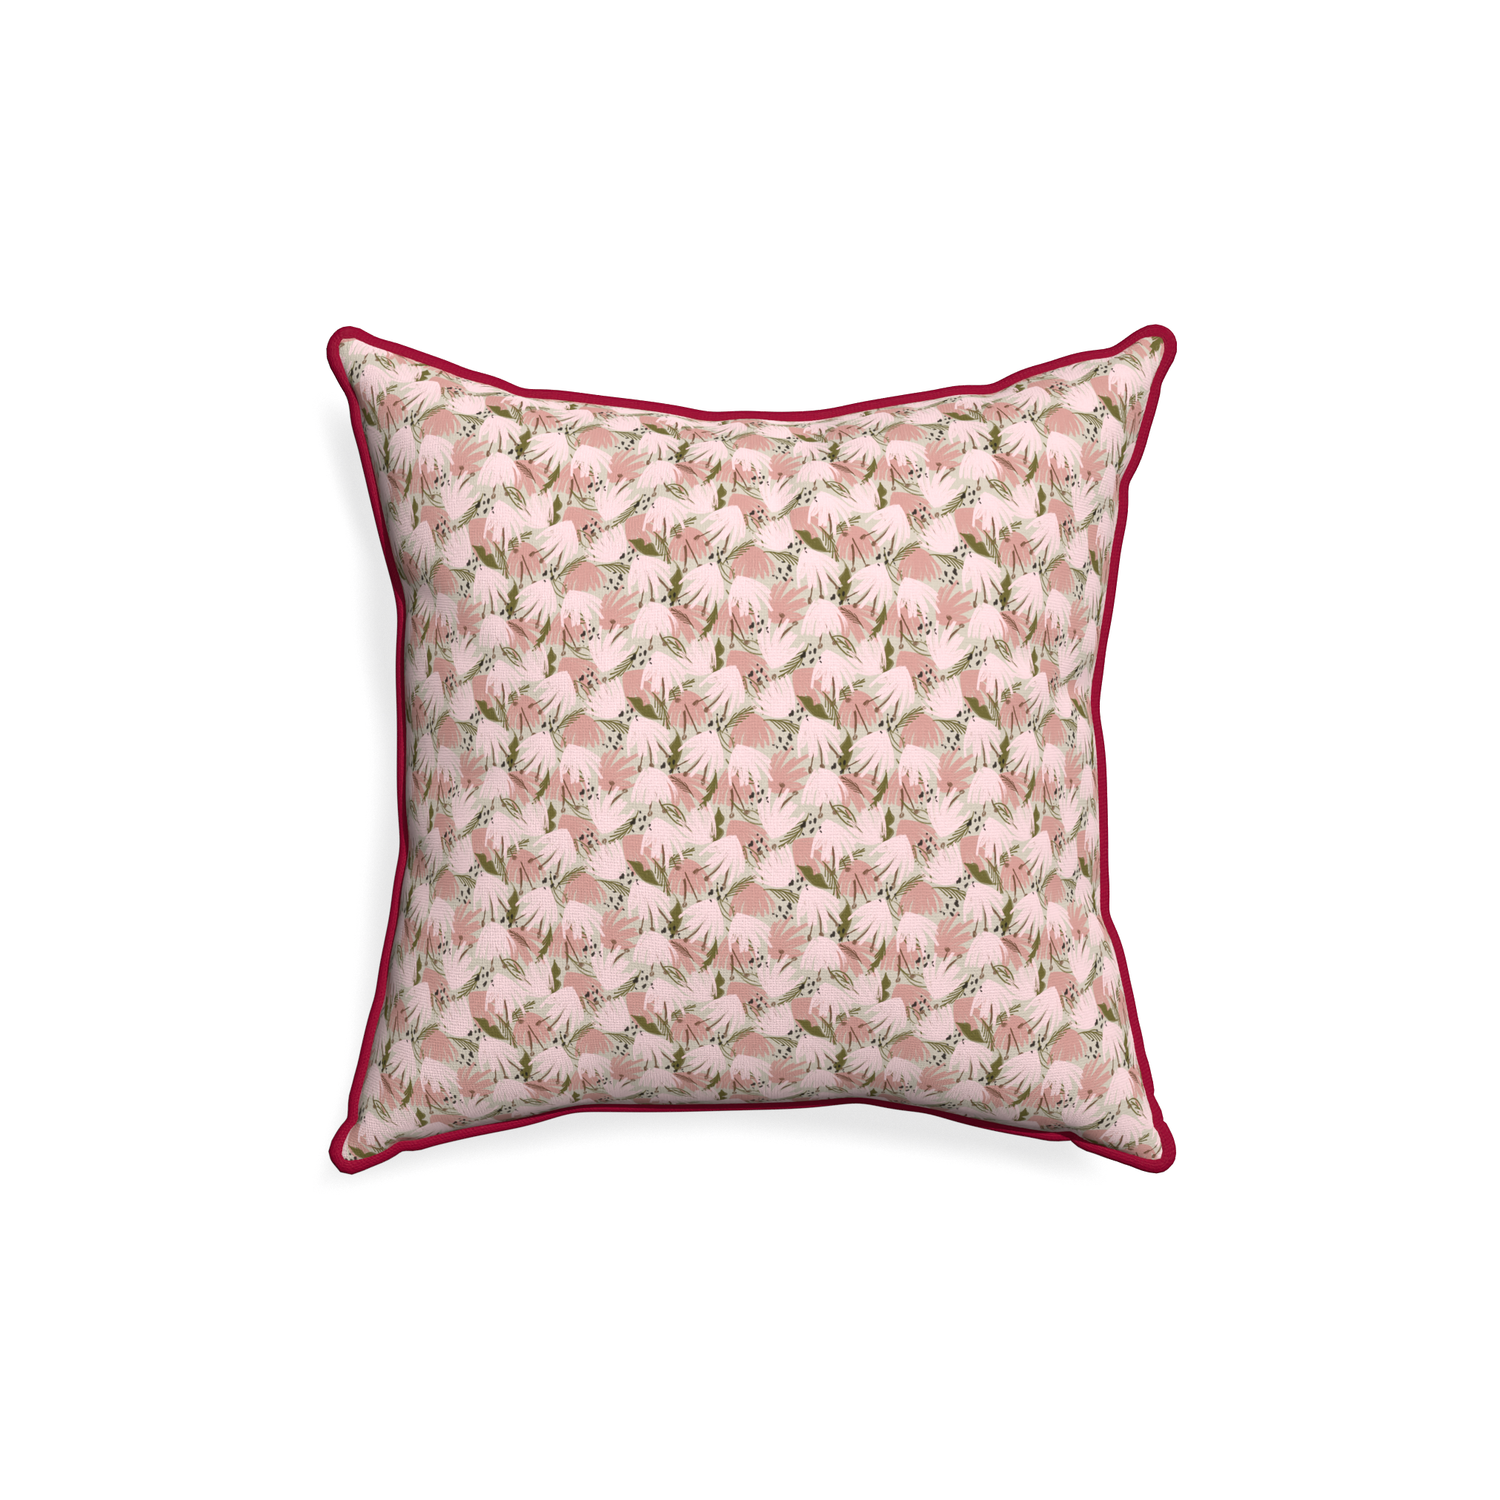 18-square eden pink custom pillow with raspberry piping on white background